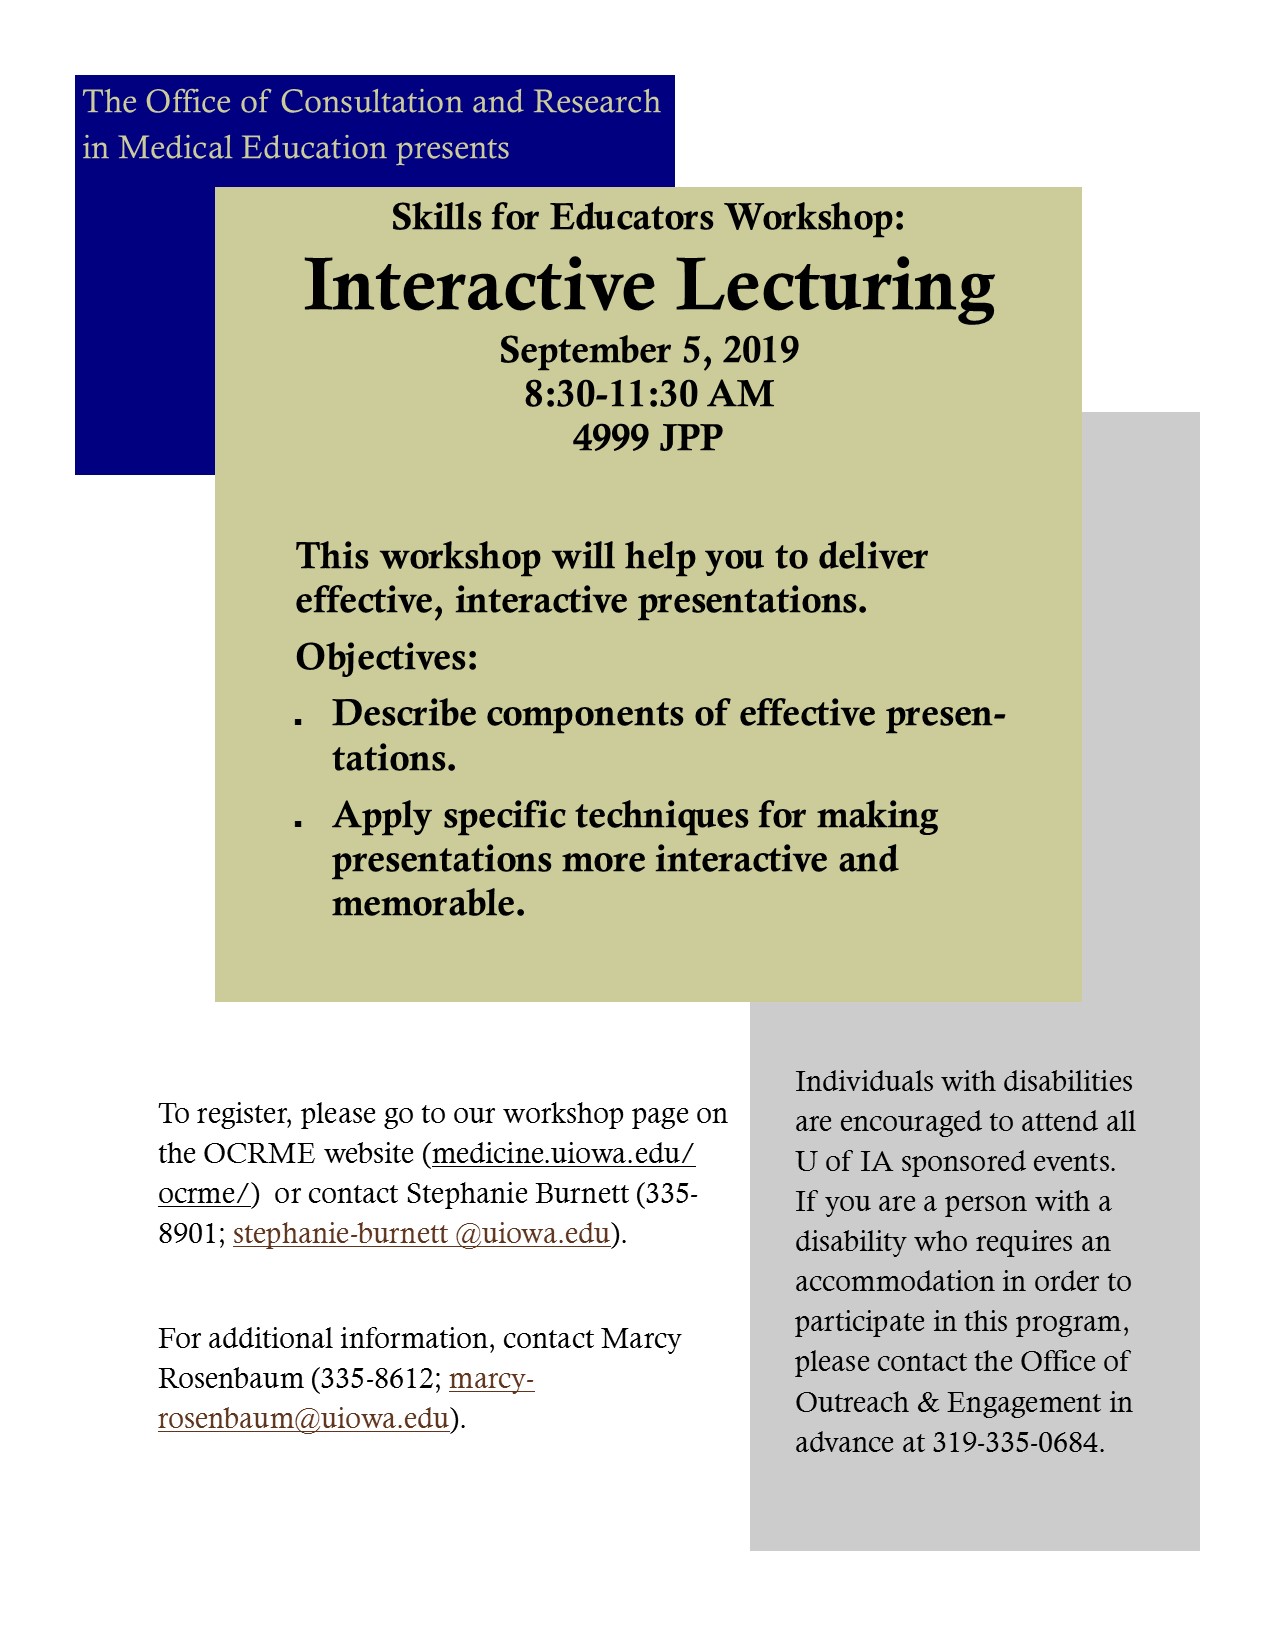 Skills for Educators Workship Series: Interactive Lecturing promotional image